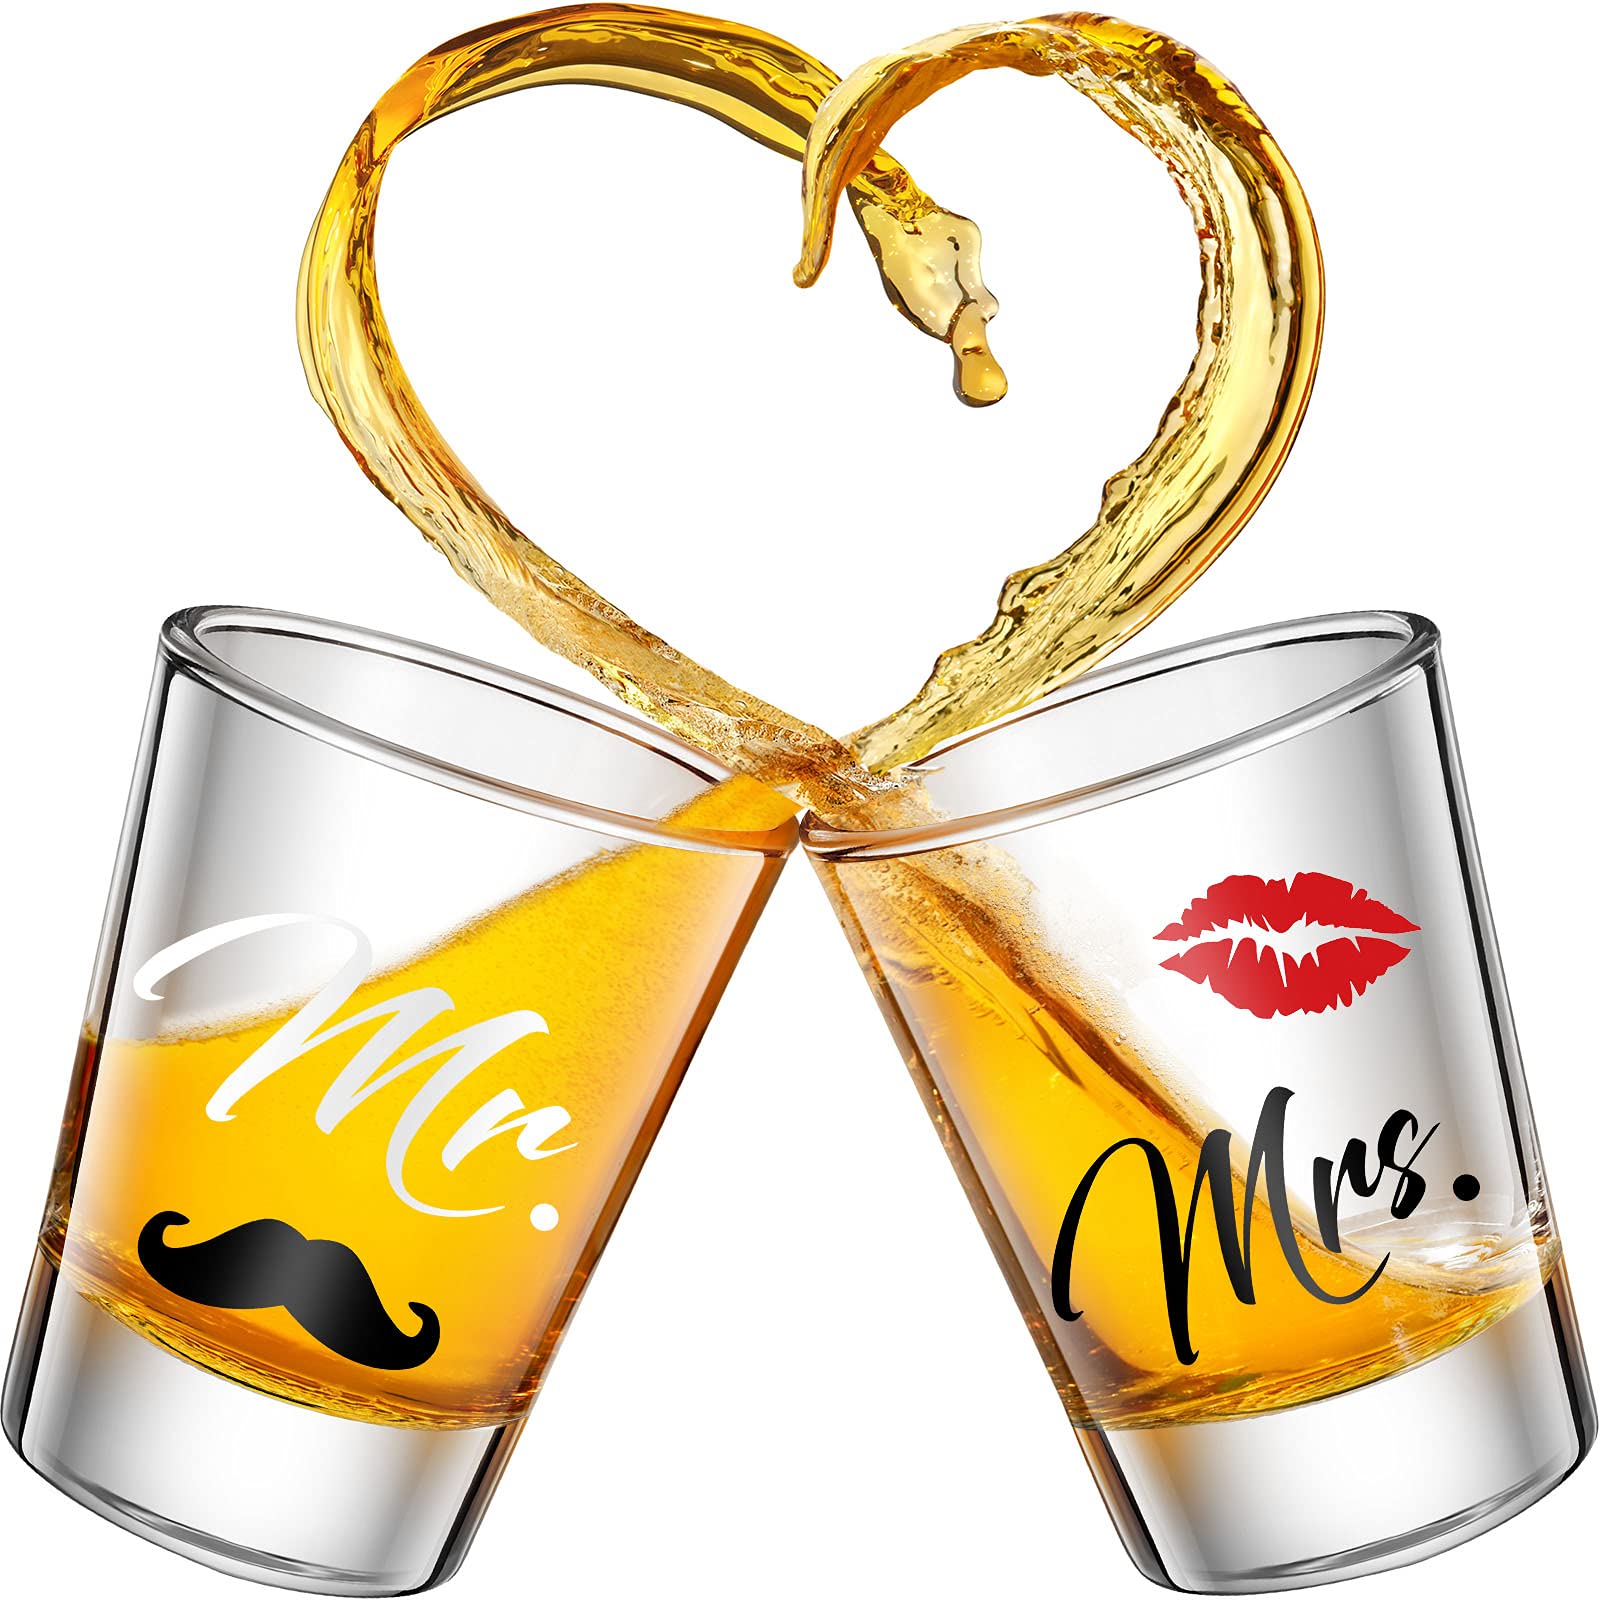 2 Pieces Mr and Mrs Shot Glasses 2 Oz Gold Wedding Party Wine Glasses Engagement Anniversary Bridal Shower Glass Couple Wine Glass for Newlyweds and Couples (Charming Style)